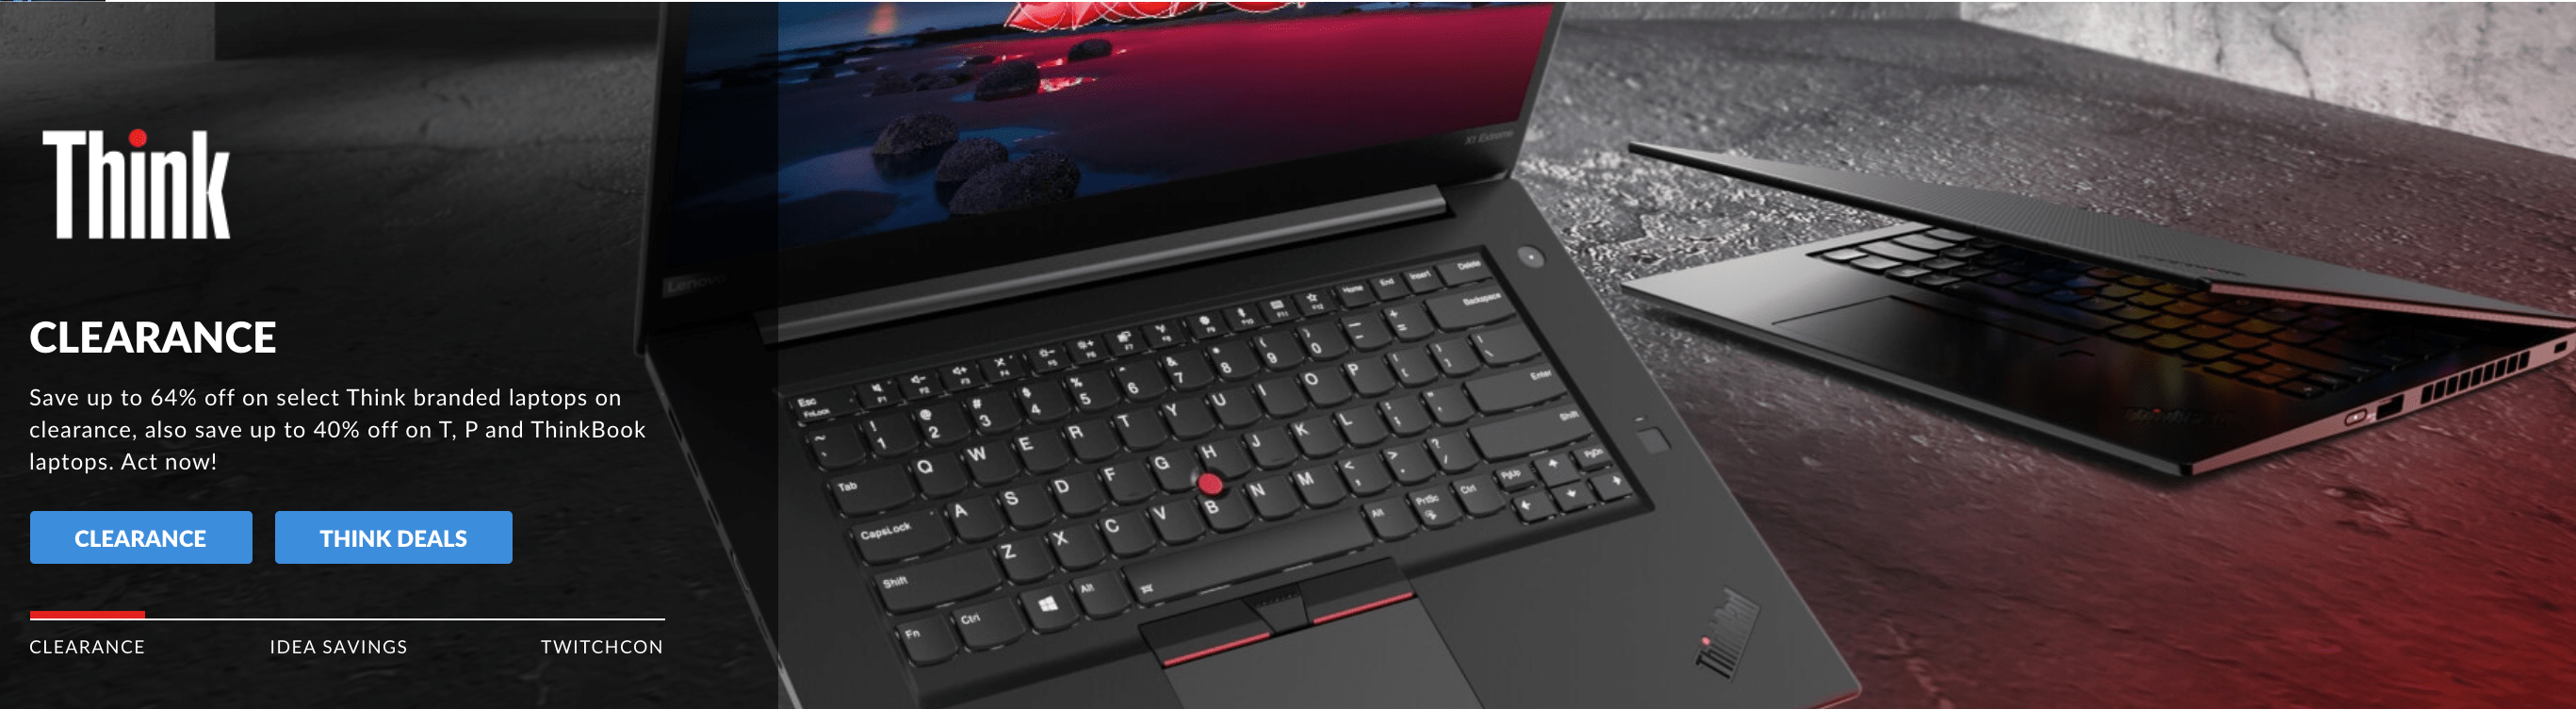 Lenovo Canada Clearance Deals: Save up to 64% off ThinkPad ...